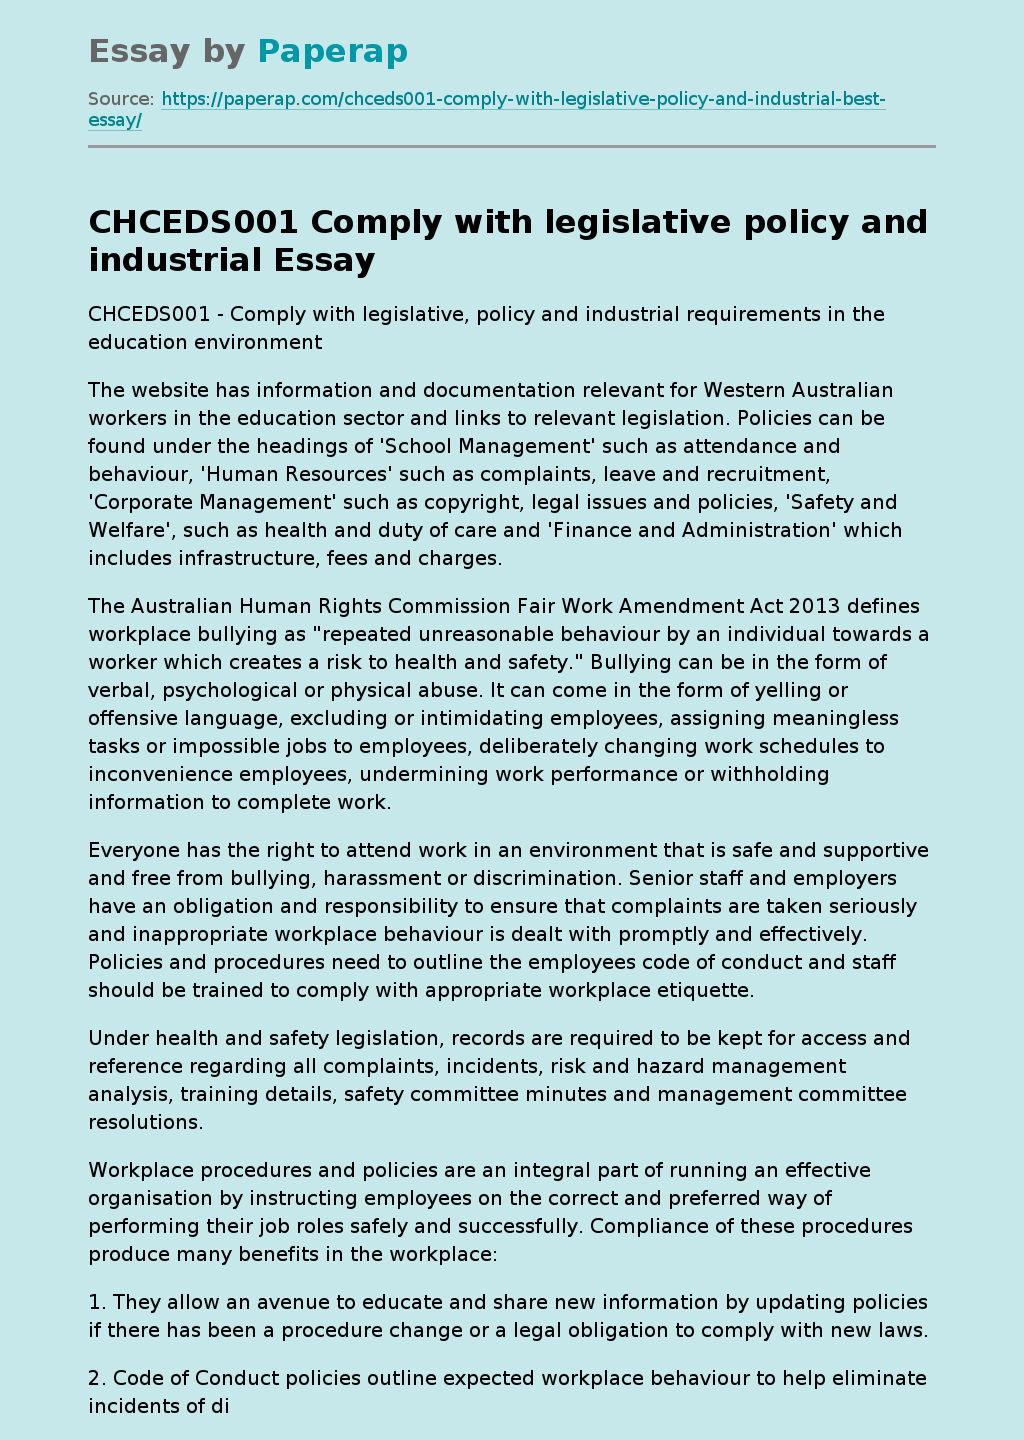 CHCEDS001 Comply with legislative policy and industrial